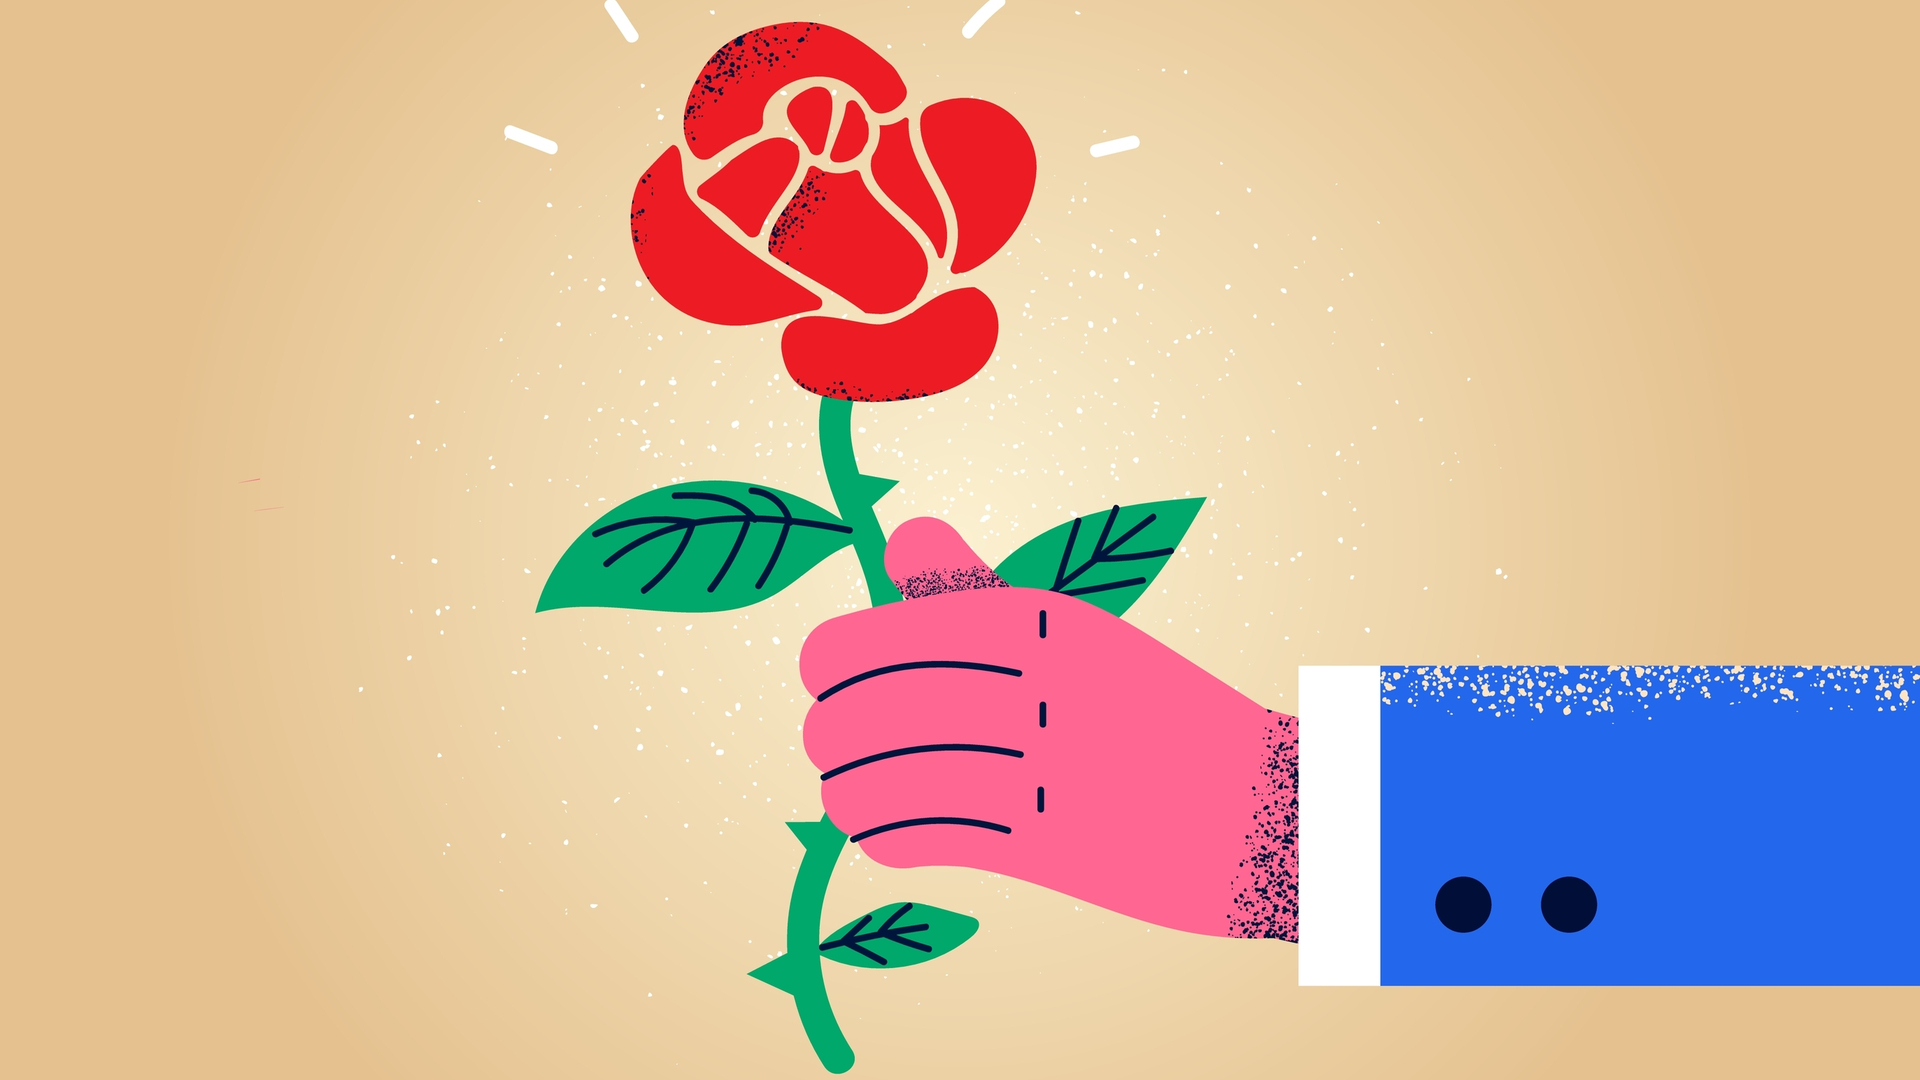 Drawing of a man's hand in blue suit holding a red rose and offering it forward. Beige background.